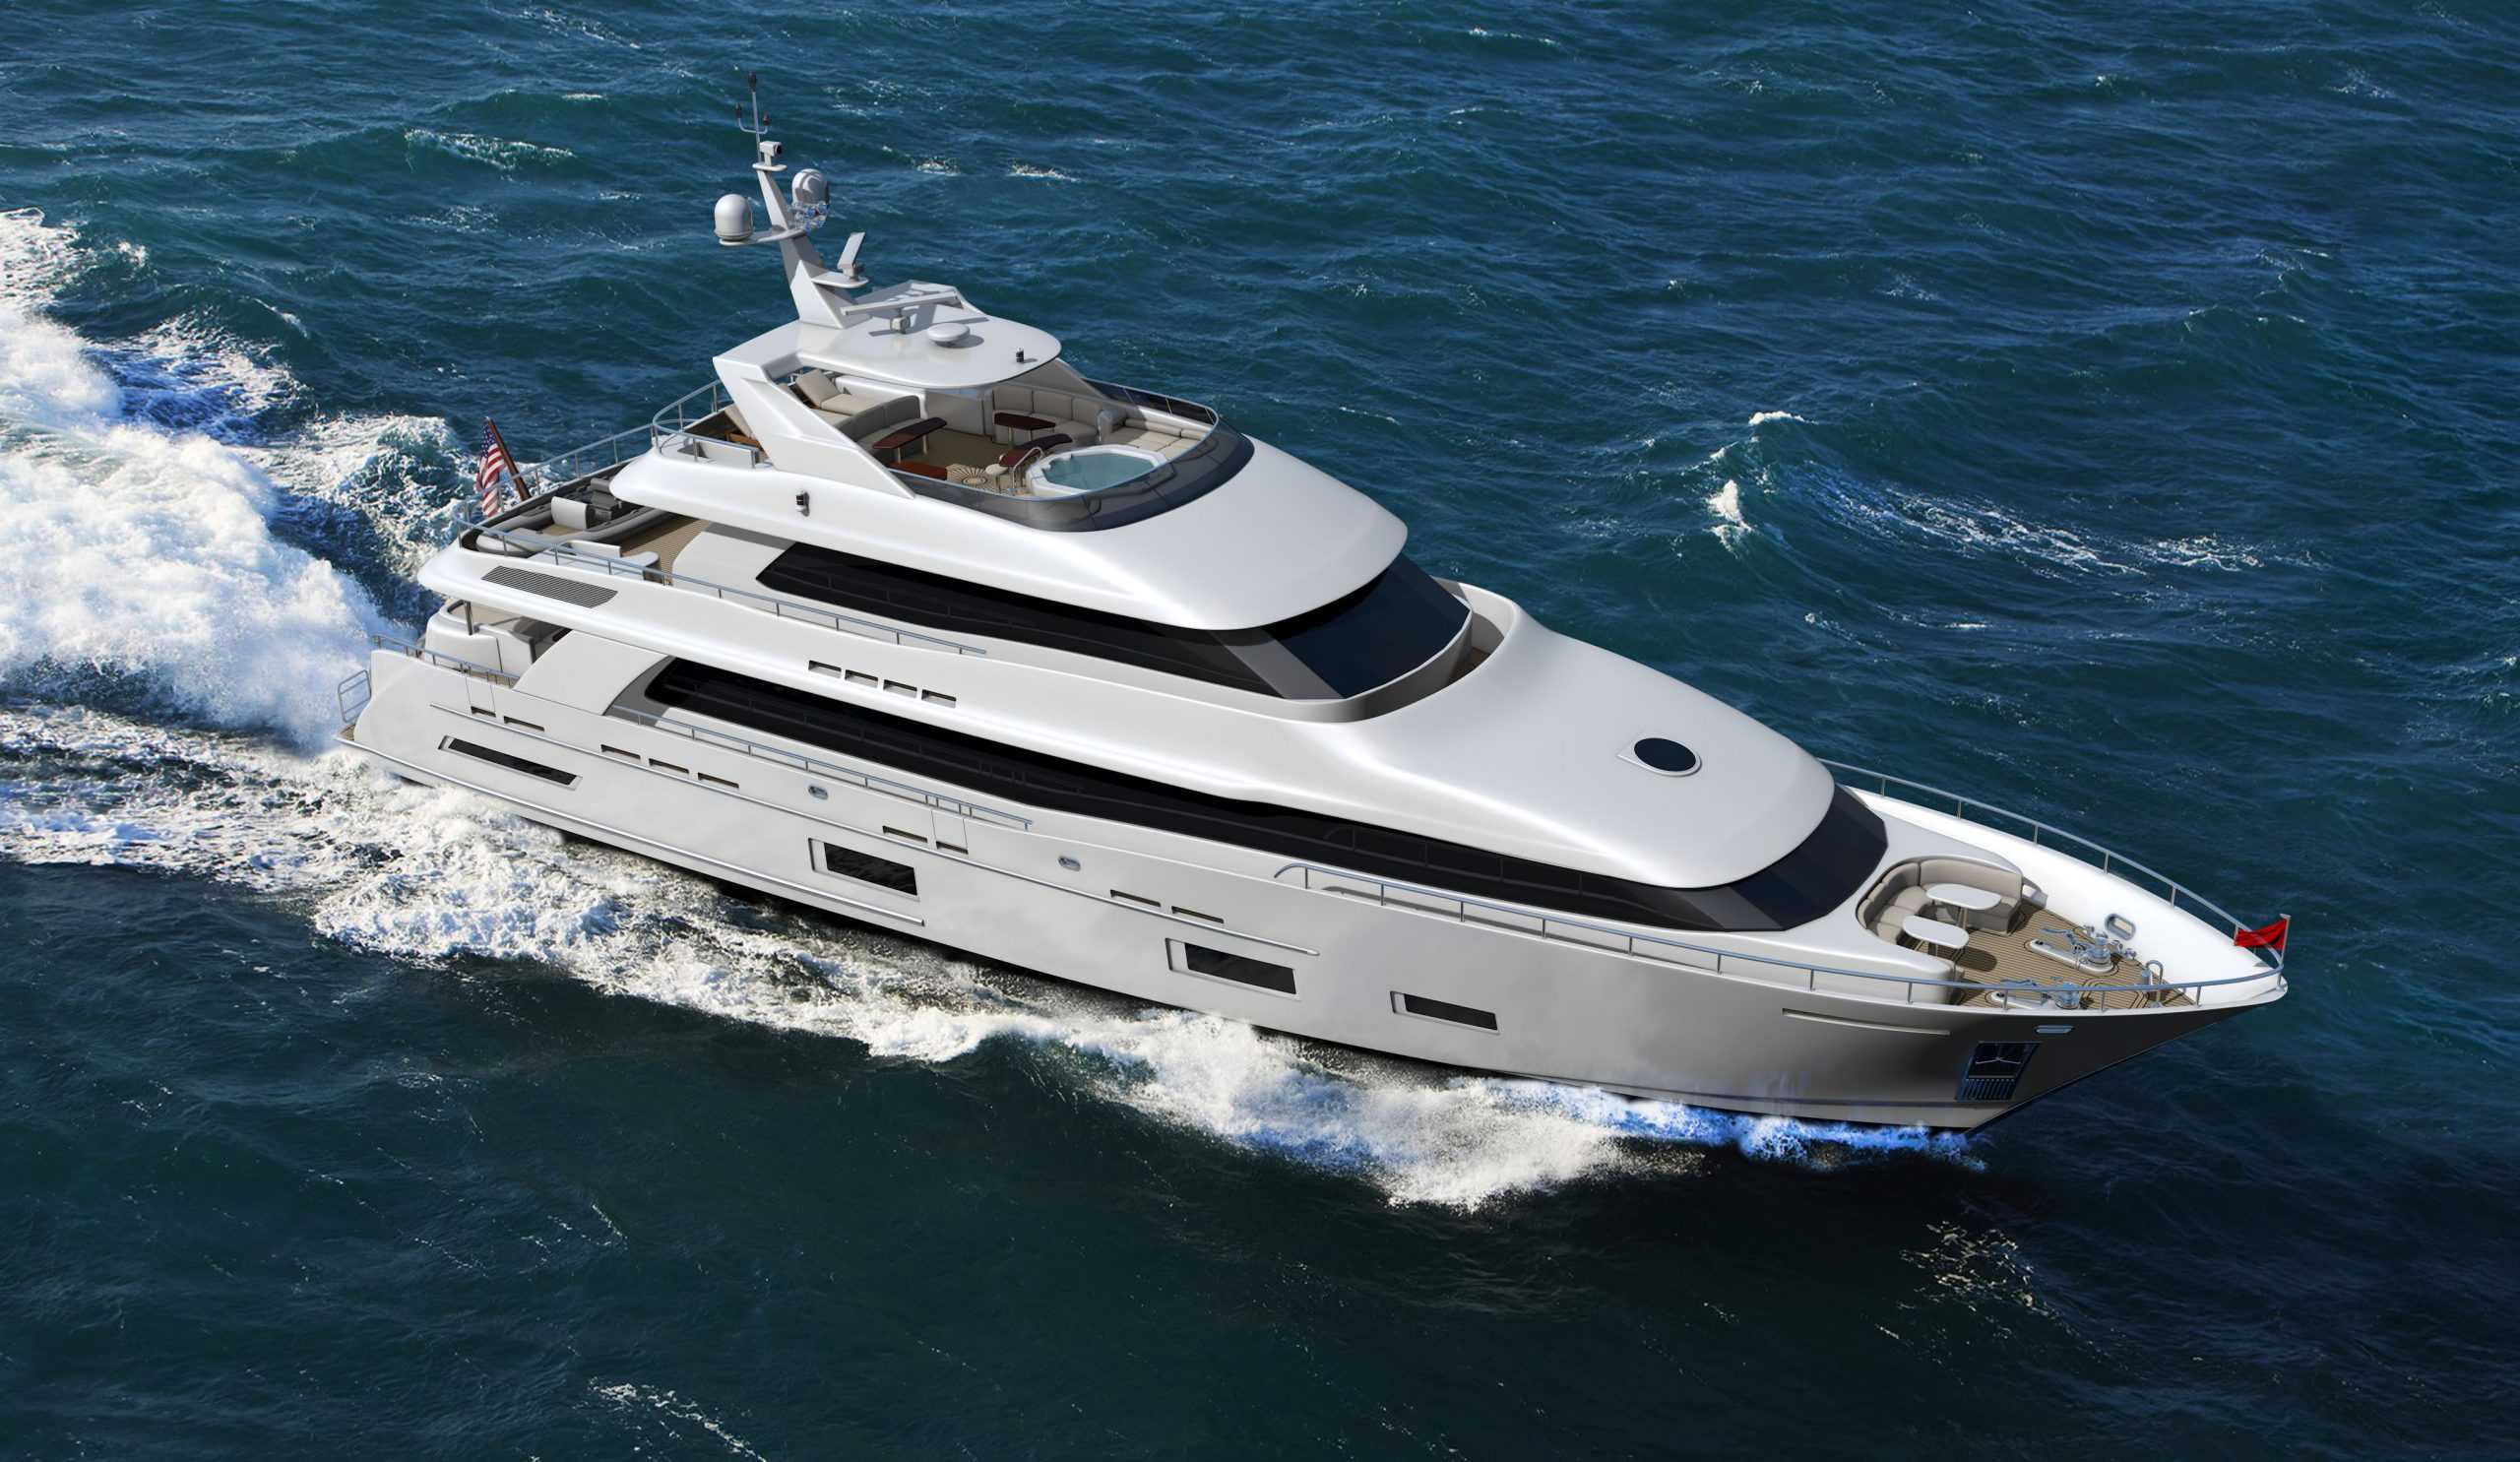 cl 112 bow scaled - Karen Lynn Interiors - Interior Design for Yacht, Aircrafts and Residential Projects